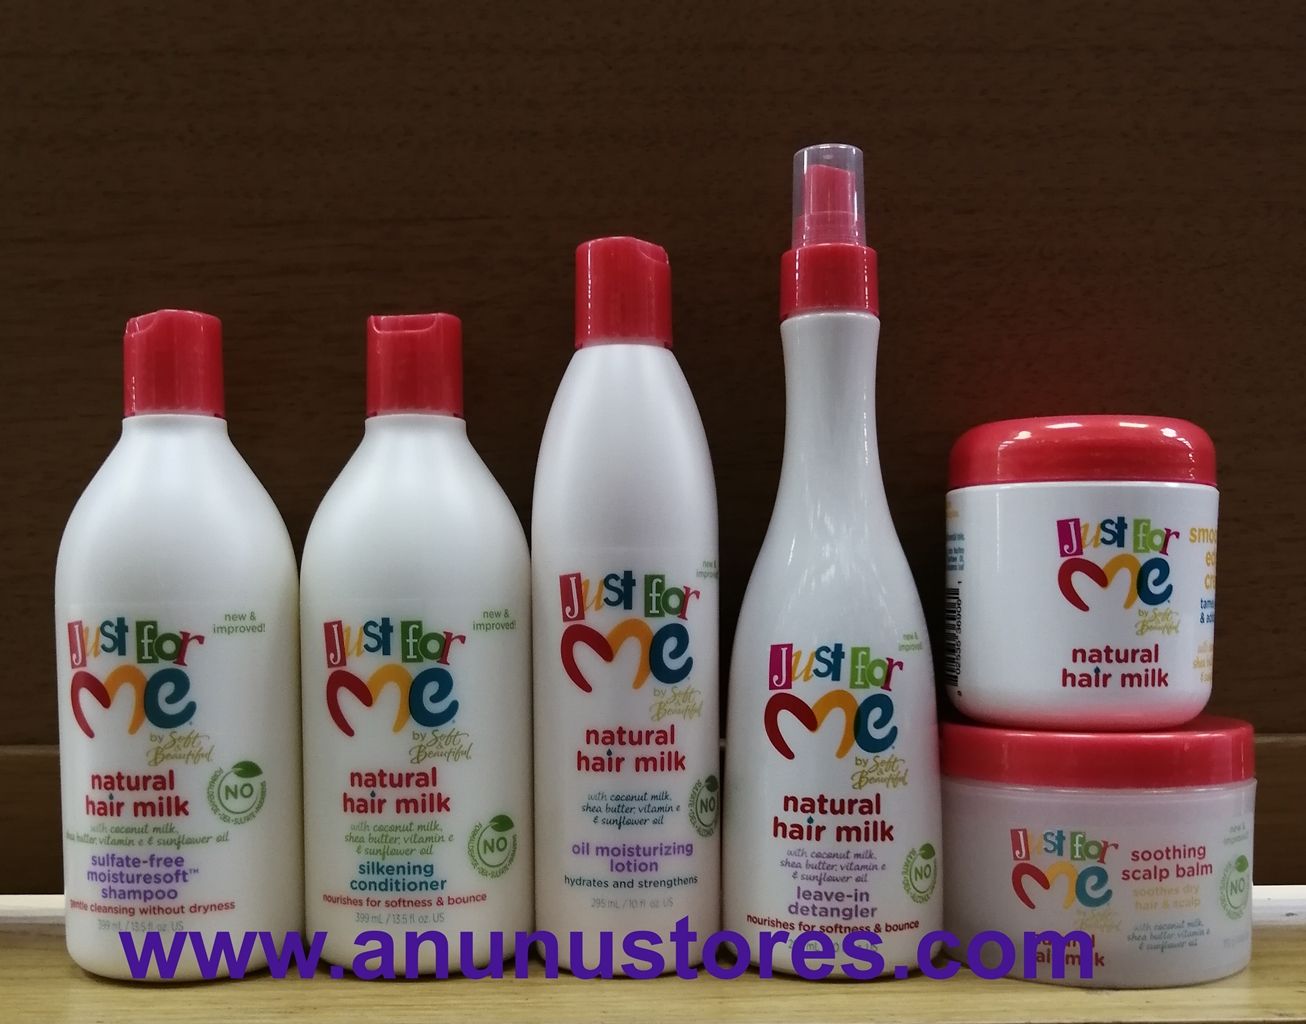 Just for Me Kid's Hair Products